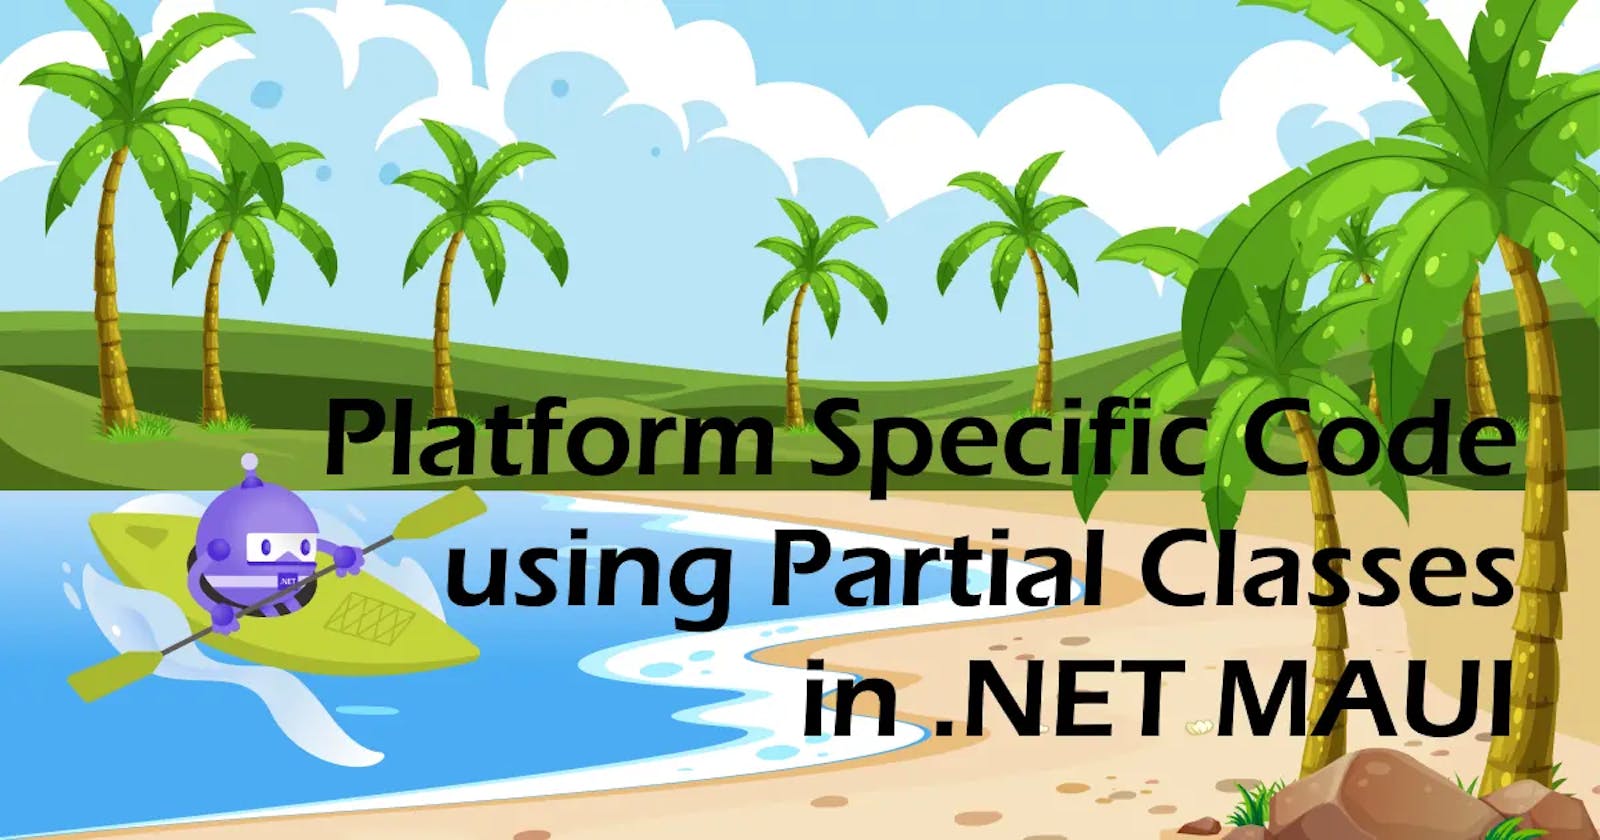 Platform Specific Code using Partial Classes in .NET MAUI